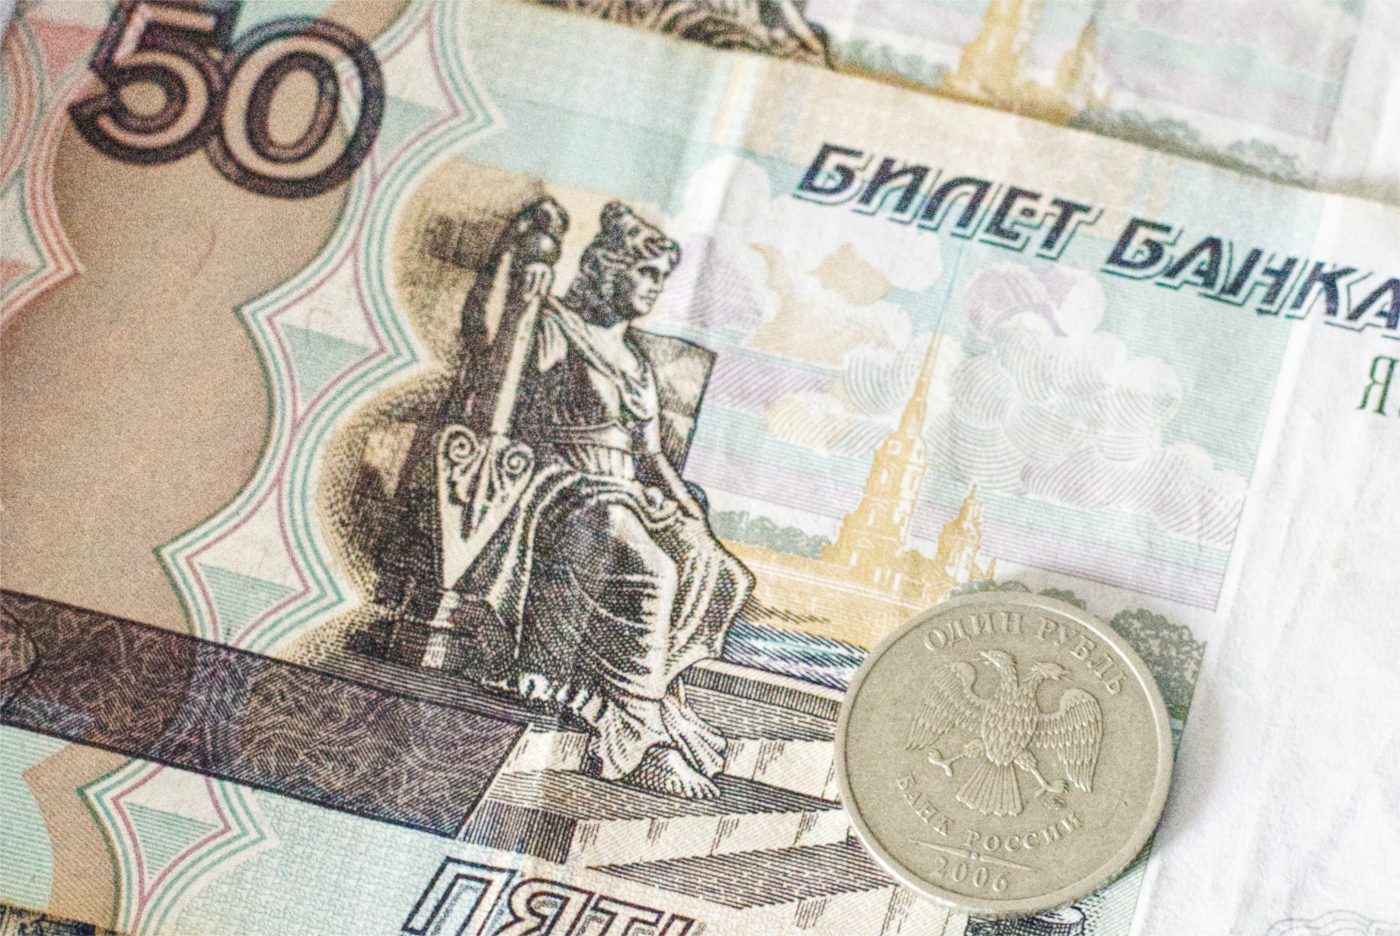 Photo: A 1 ruble coin and 50 ruble banknote in the background. Illustration of the currency of the Russian Federation, the Ruble (RUB). Credit: Benjamin Furst / Hans Lucas via Reuters Connect.